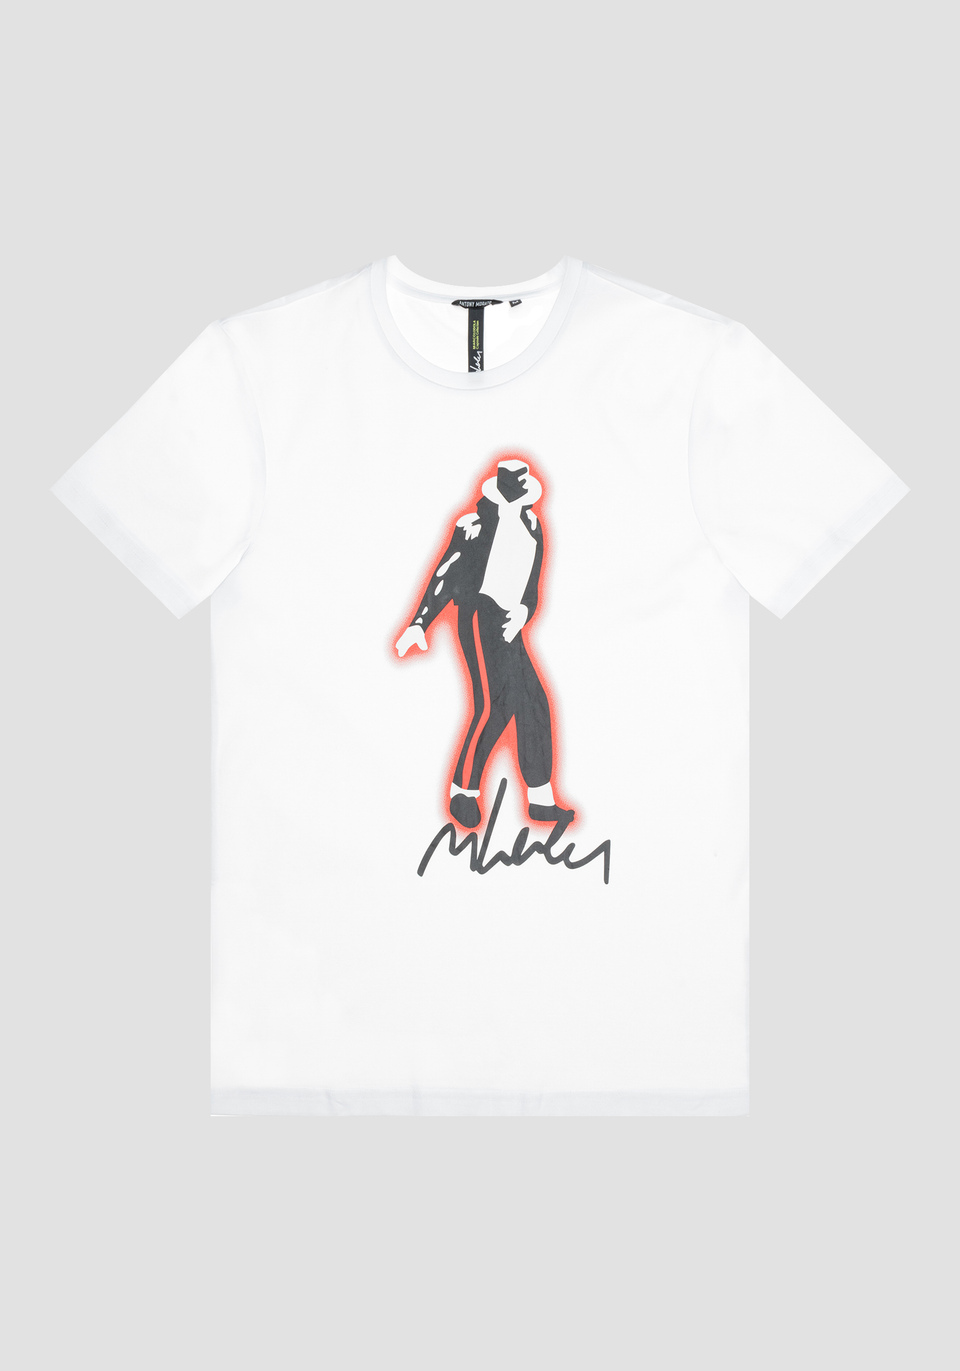 SLIM-FIT T-SHIRT IN PURE COTTON WITH MICHEAL JACKSON PRINT BY MARCO LODOLA - Antony Morato Online Shop